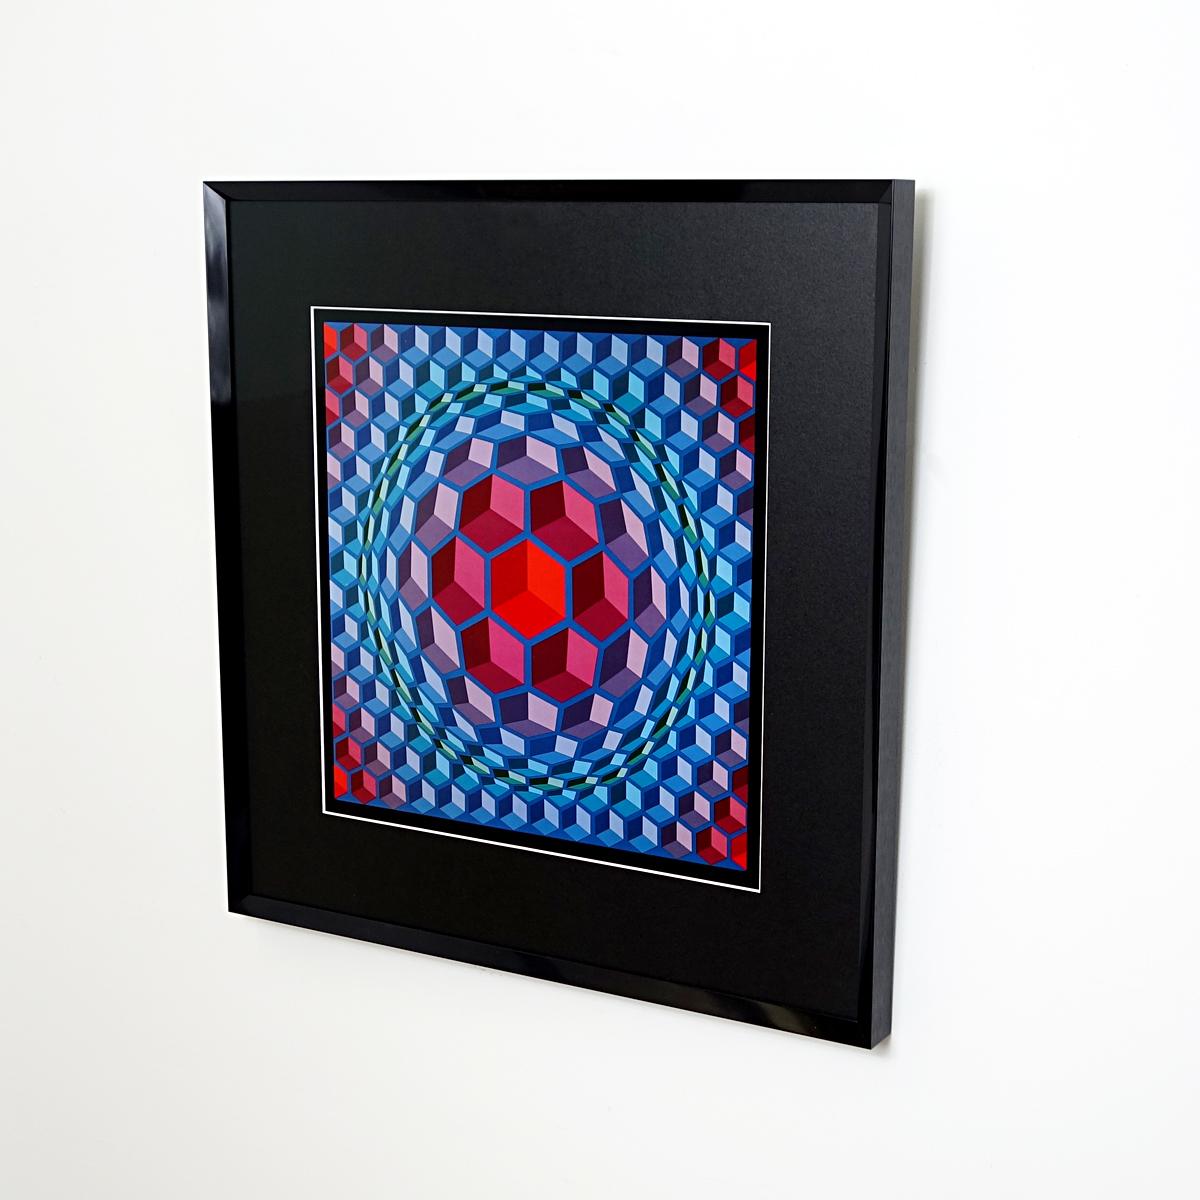 Late 20th Century Op-Art Framed Poster Printed by Editions du Griffon, 1972 For Sale